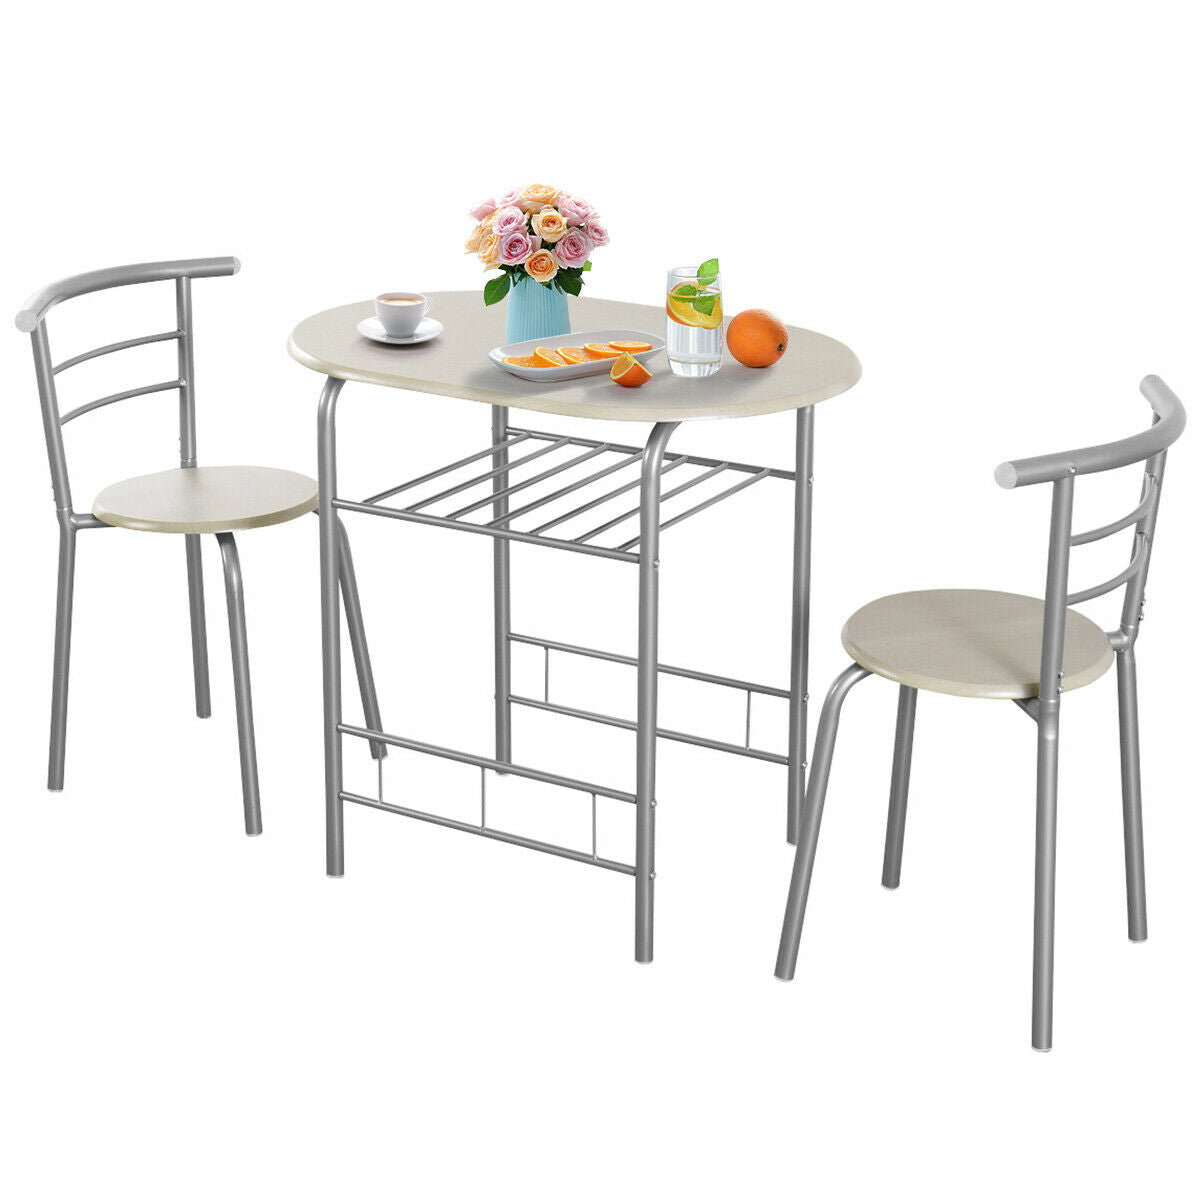 3 Pieces Compact Dining Set with Storage Shelf for Kitchen Bars